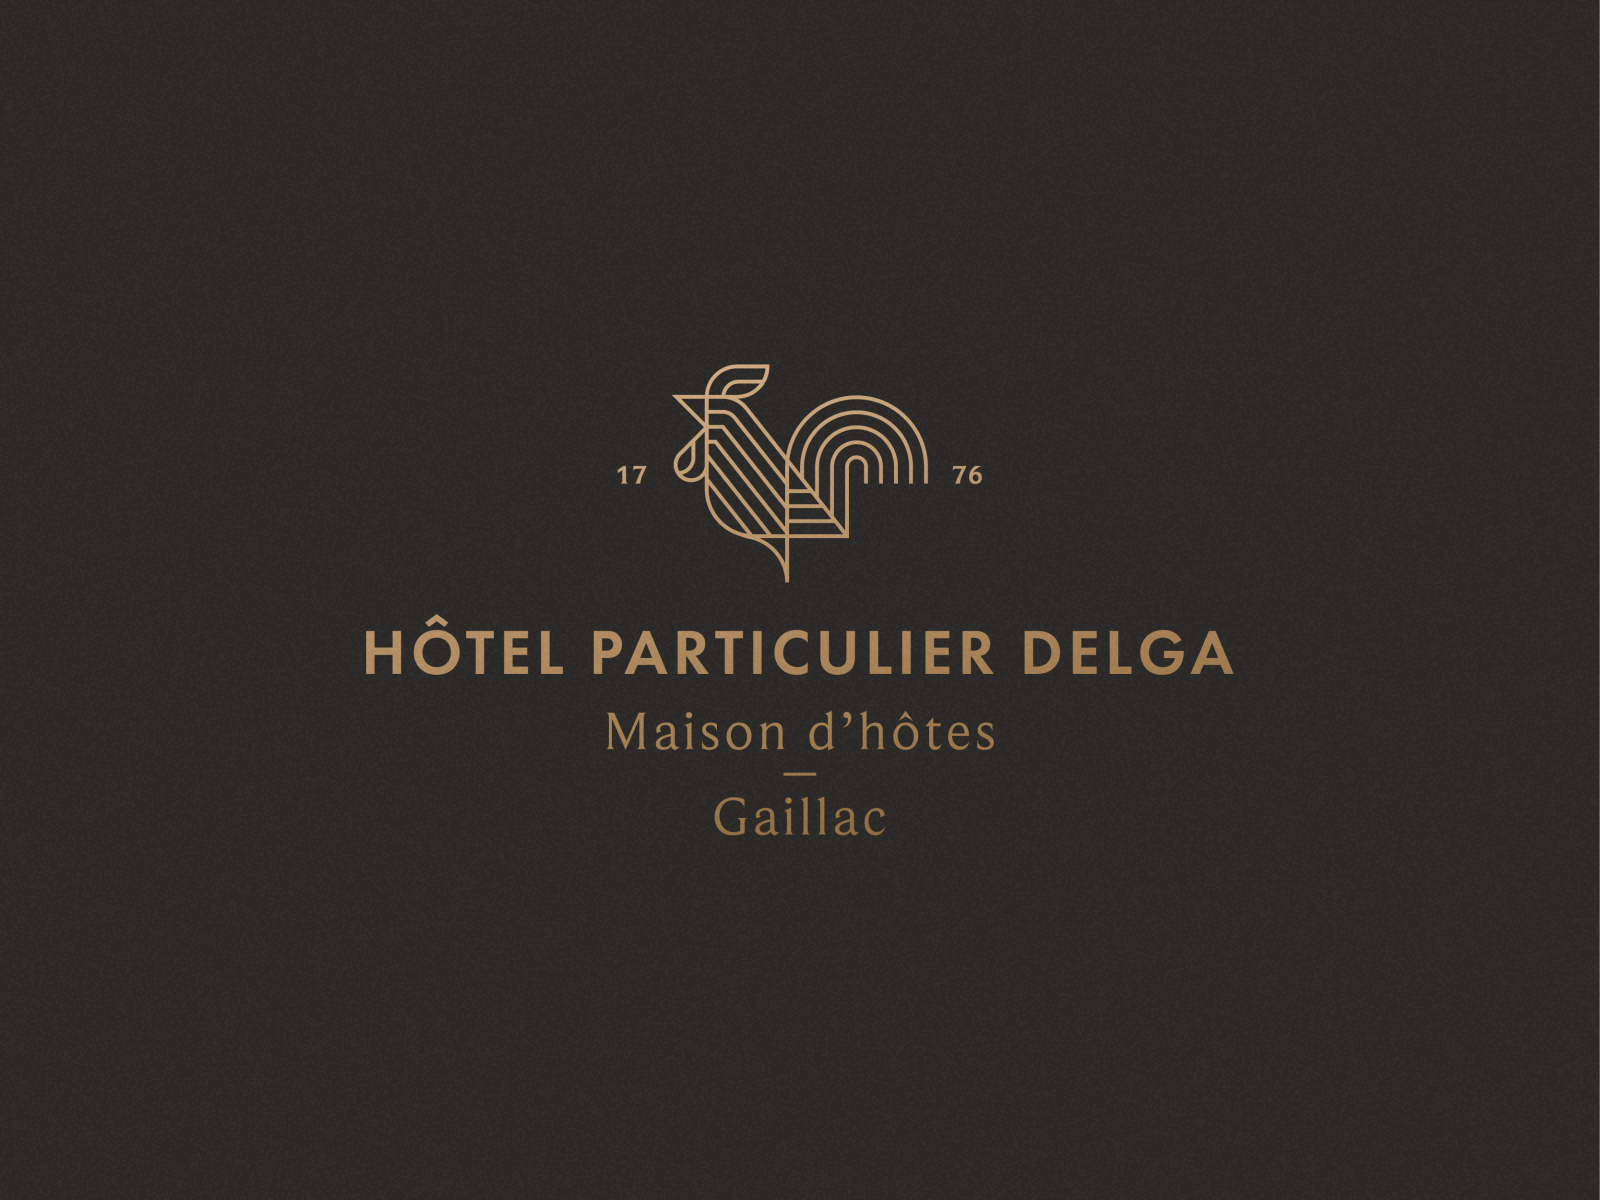 Hotel Particulier Delga by Dimitrije Mikovic on Dribbble